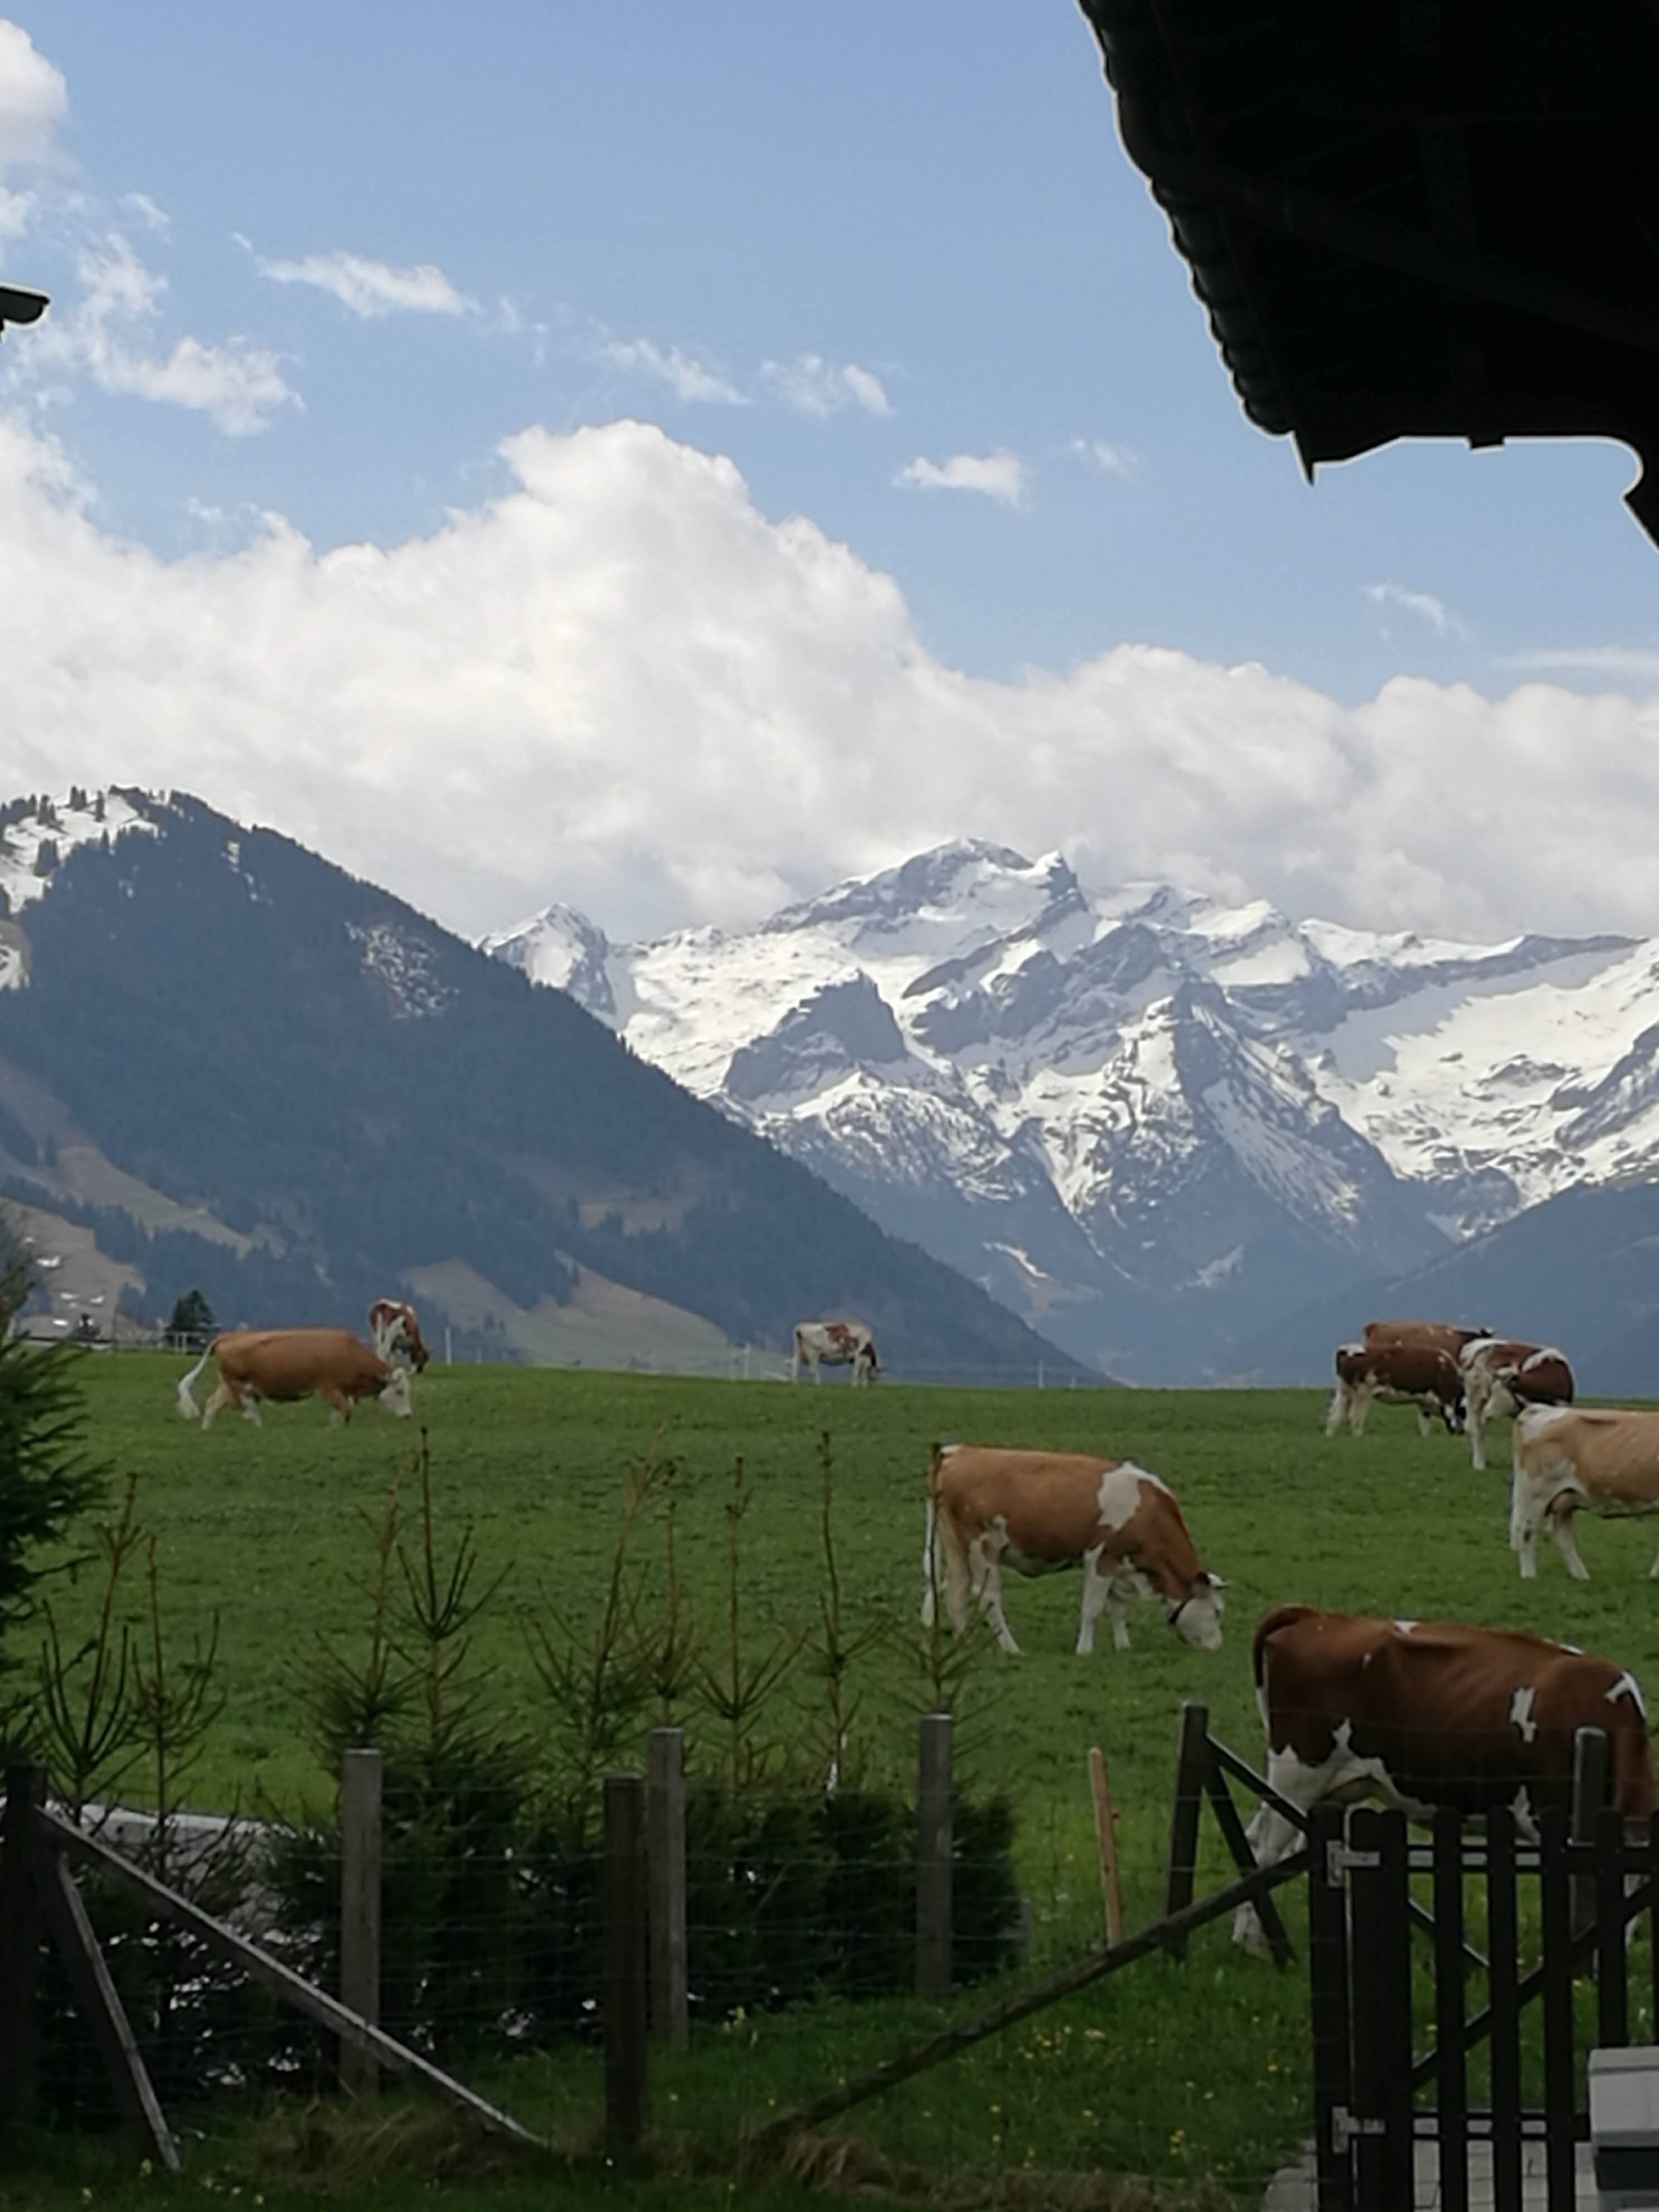 Some cows in a field near Gstaad